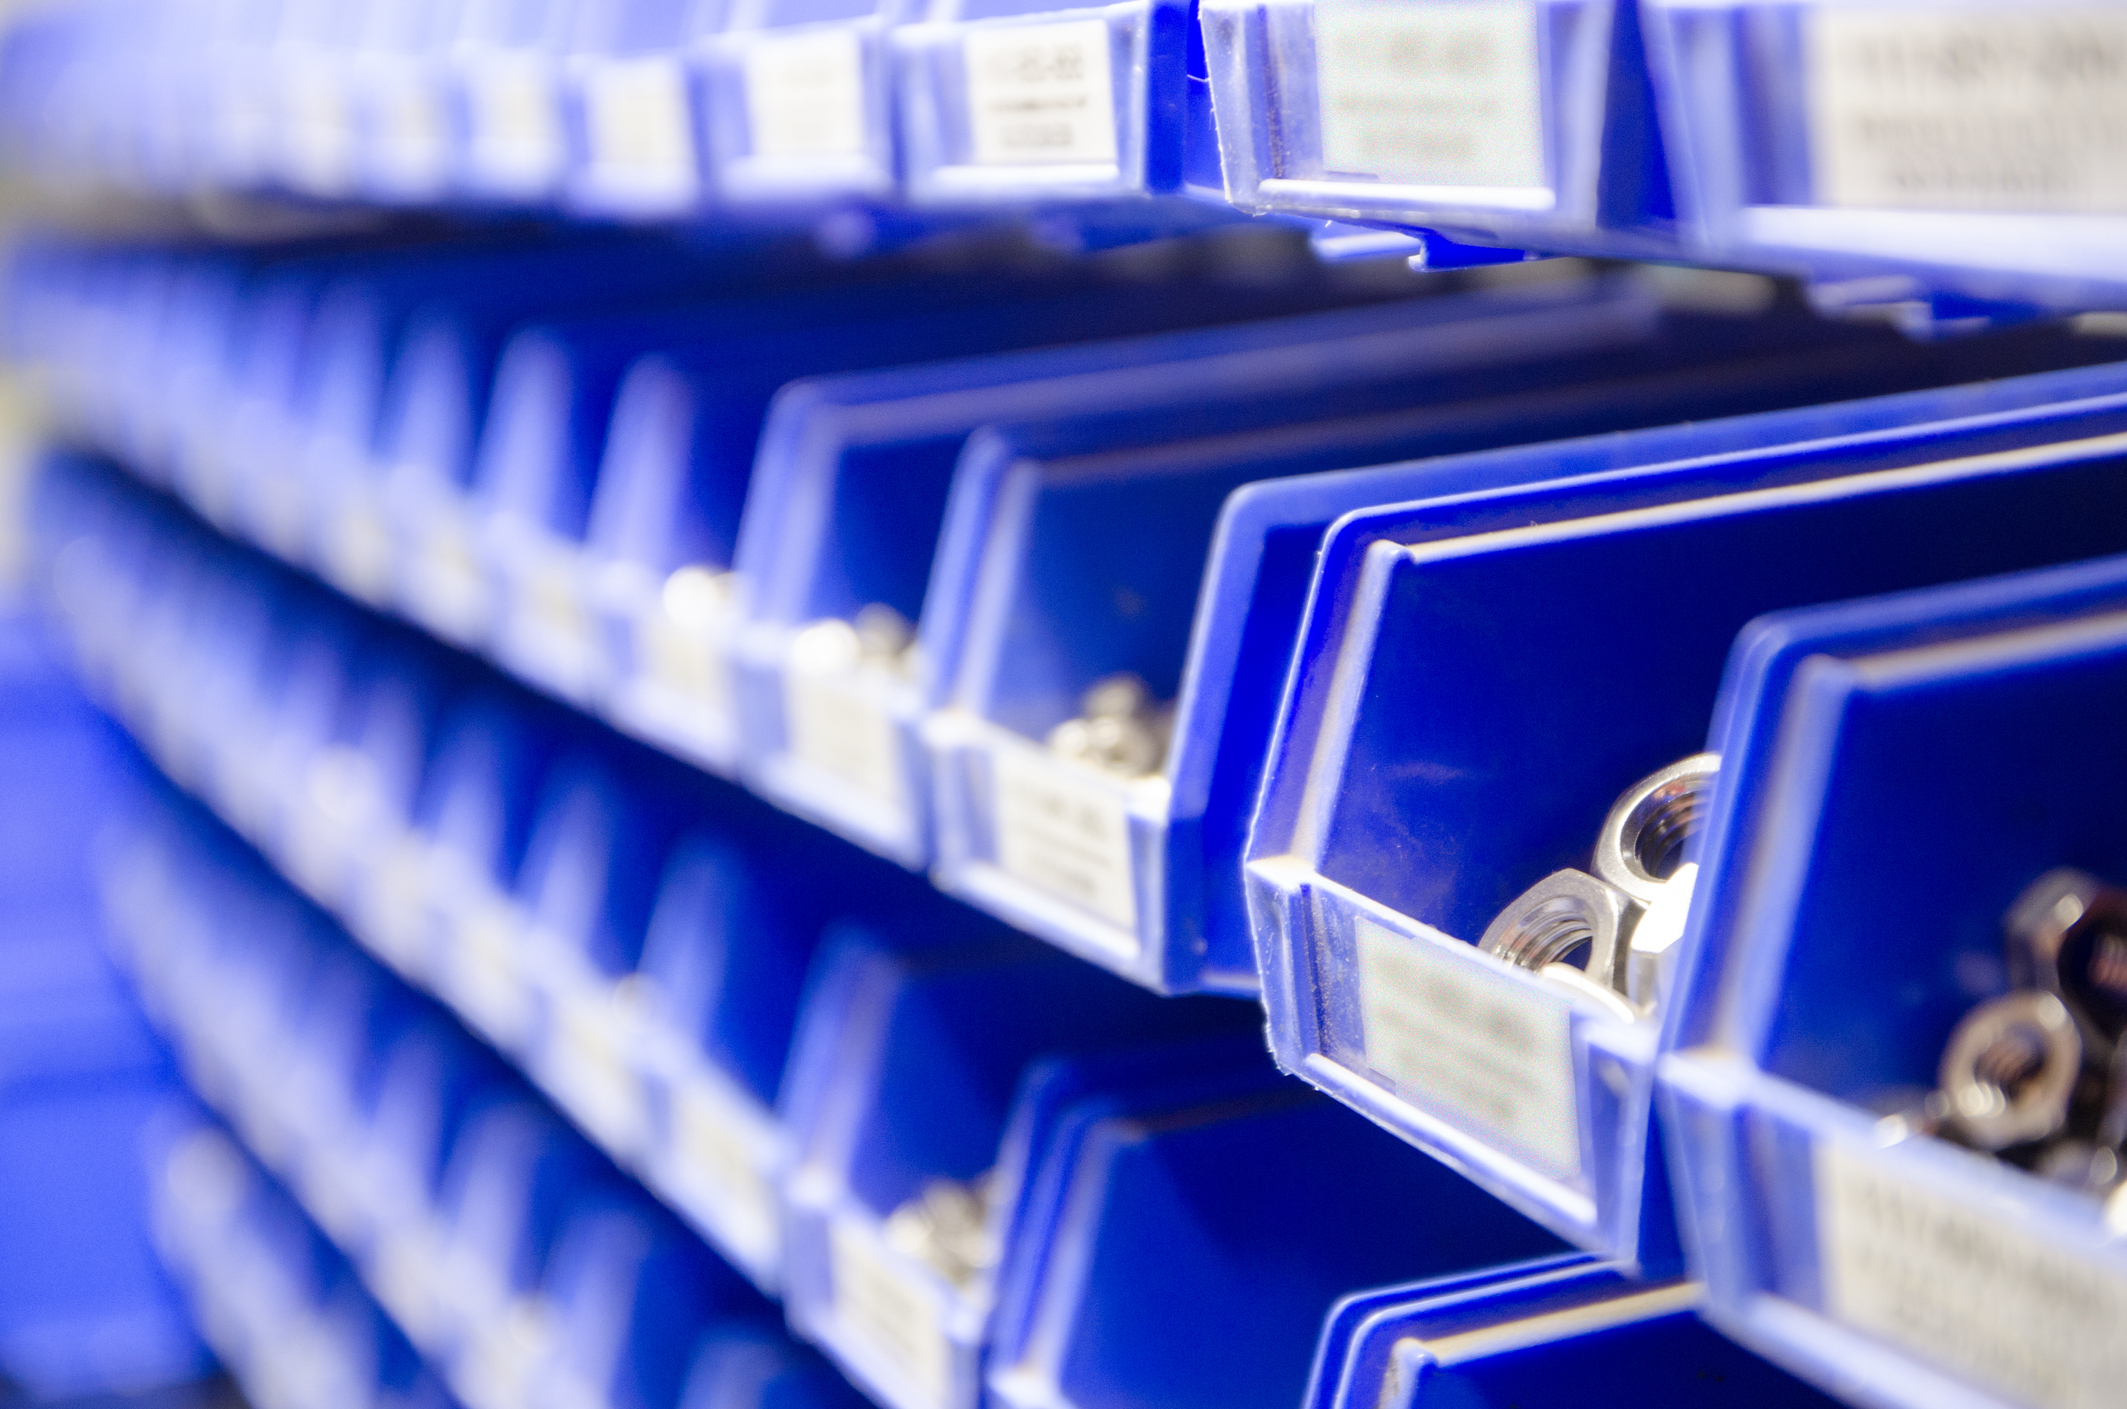 Rows blue plastic storage bins containing screws, bolts and nuts.